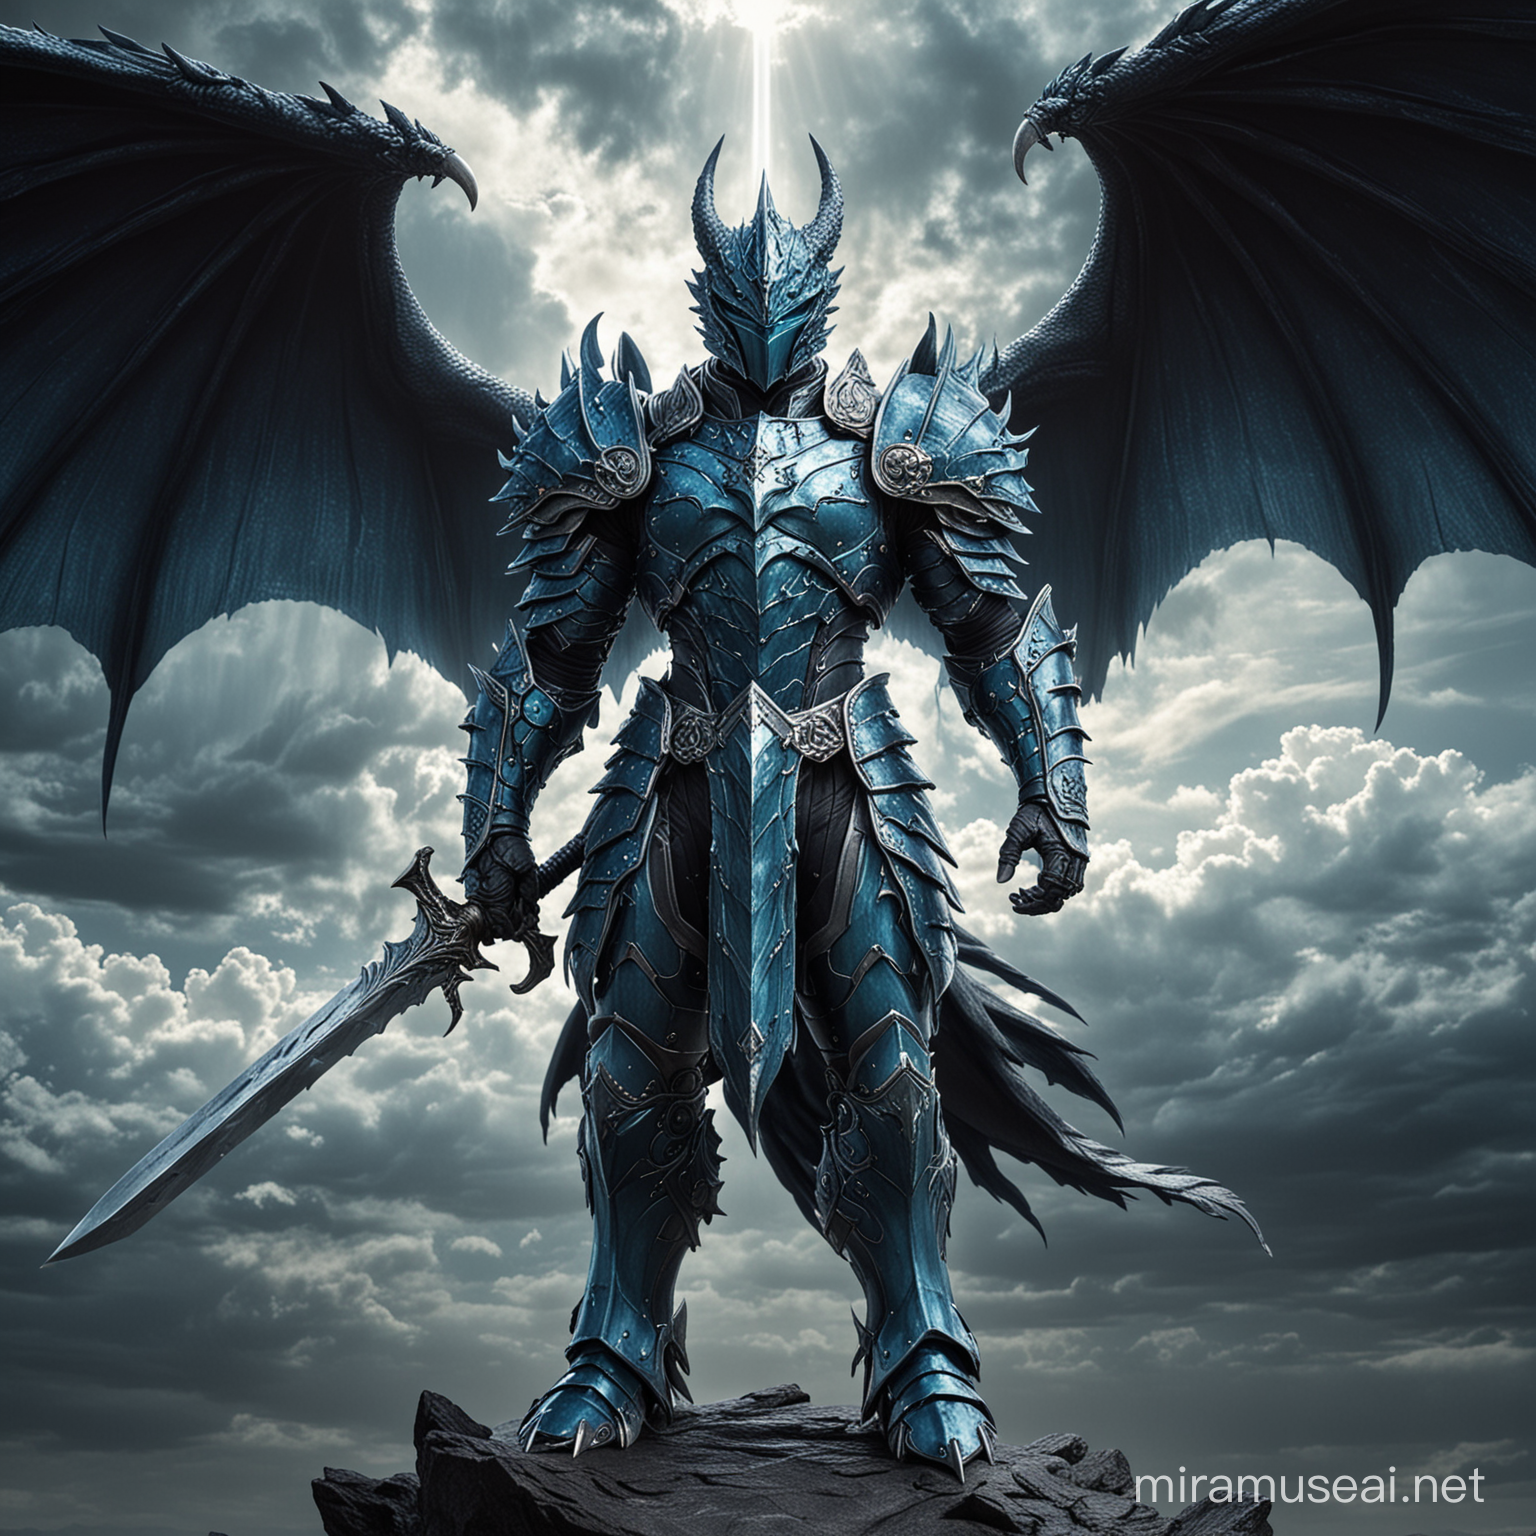 Majestic Draconian Knight with Angelic Dragon Armor Facing Dark Clouds